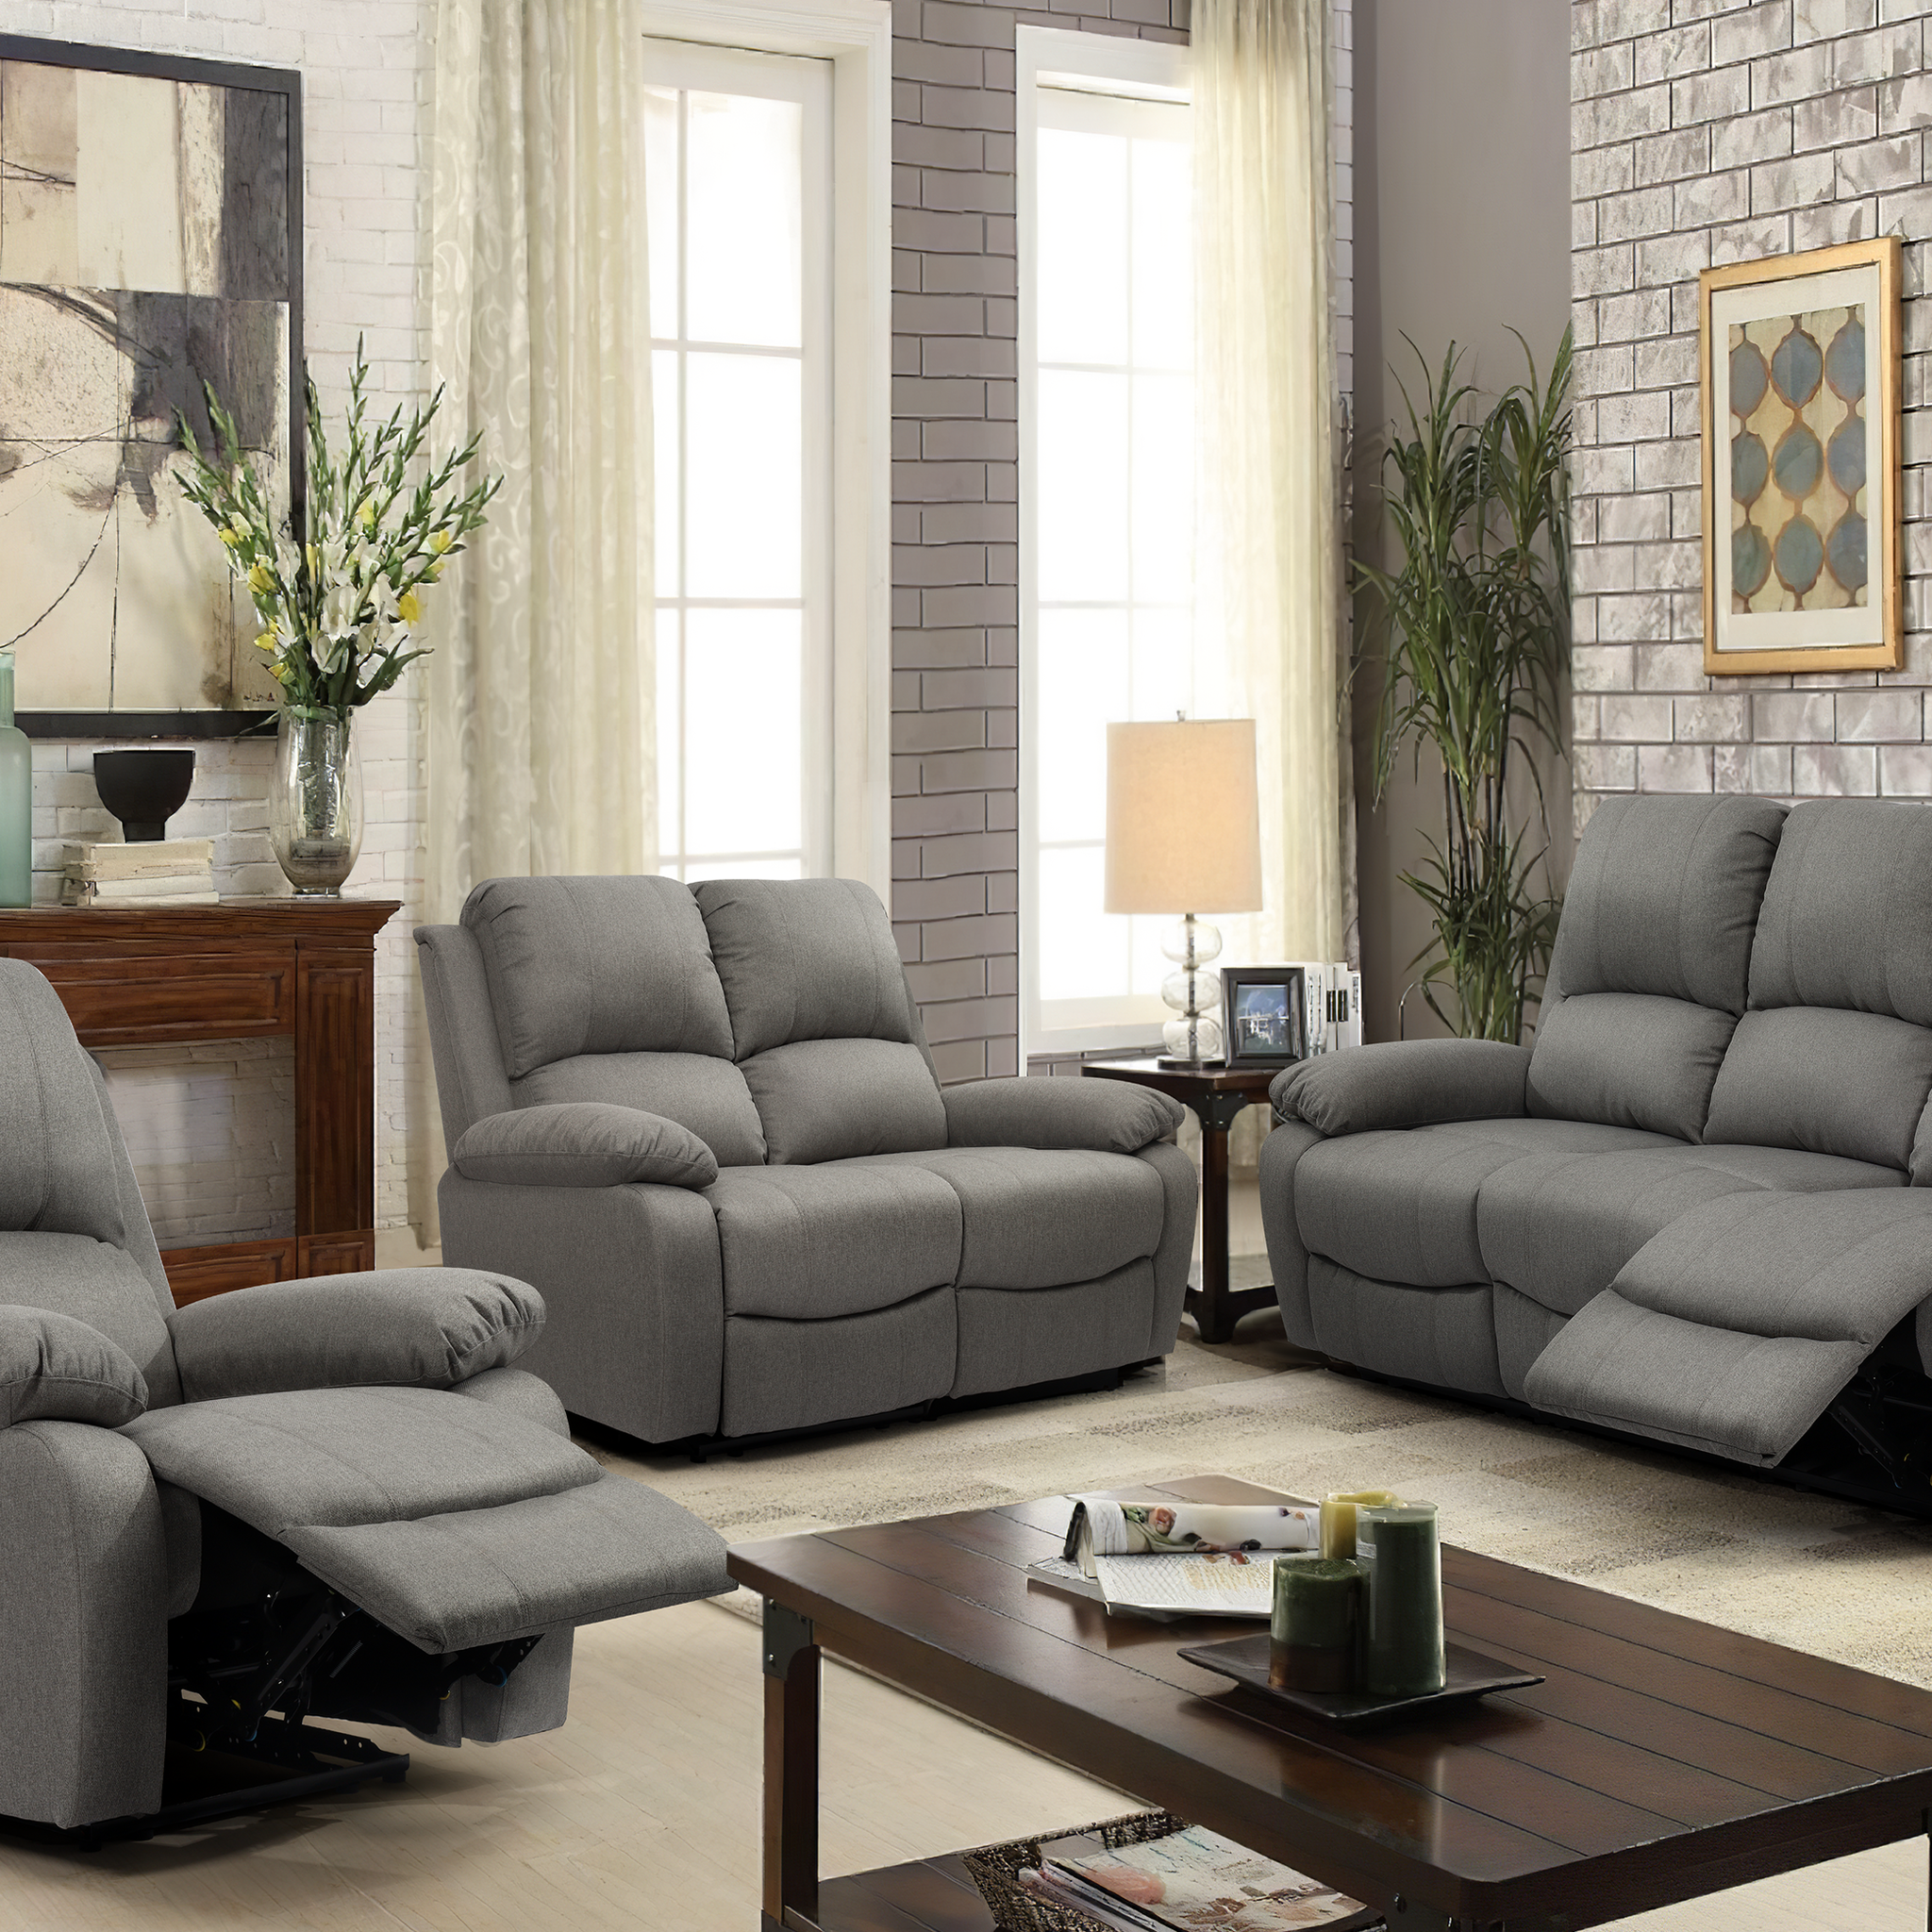 How Are Recliners Improving Healthcare? All About Medical Reclining Chairs